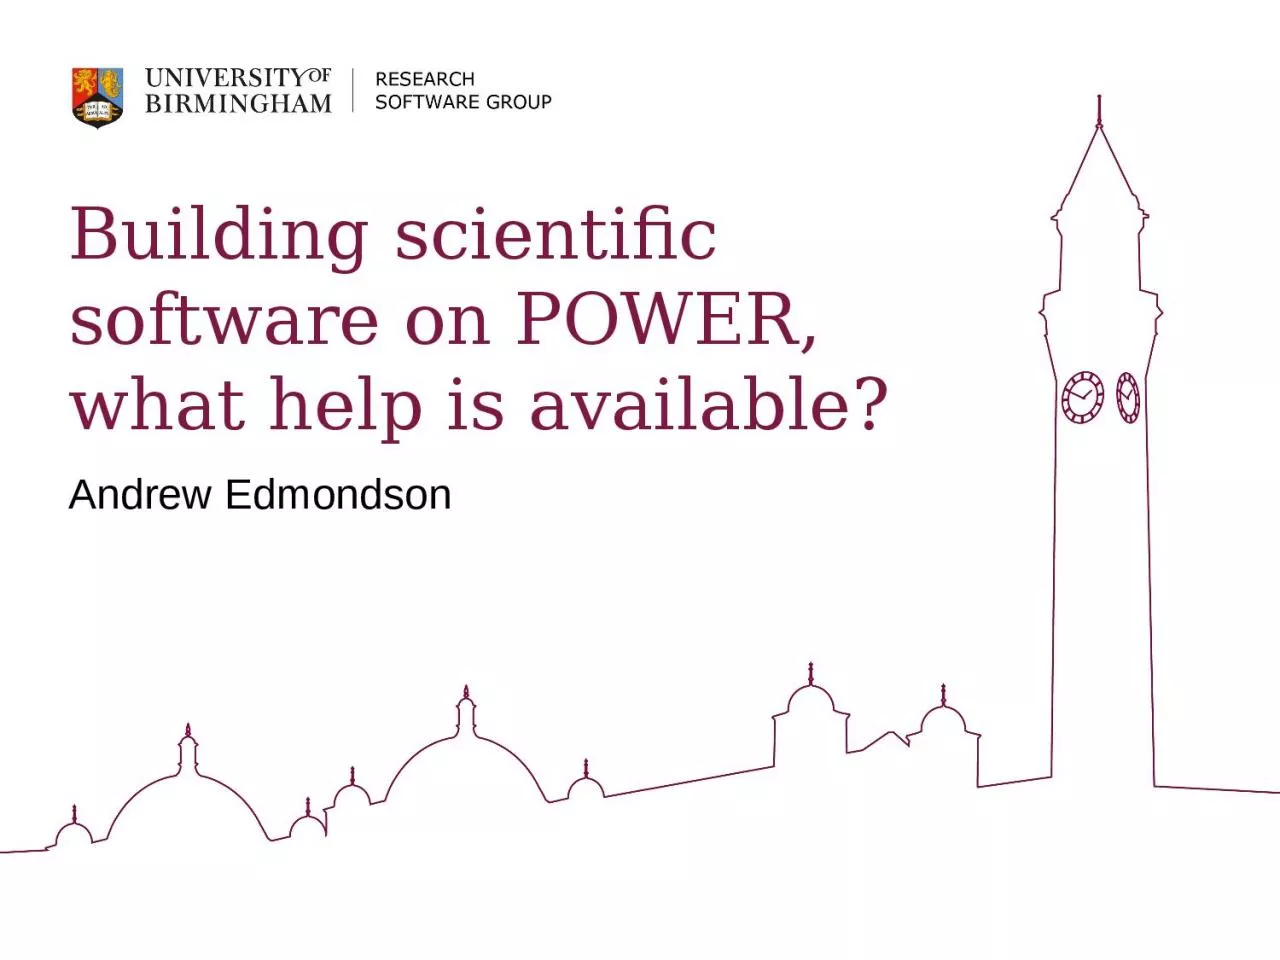 Building scientific software on POWER, what help is available?